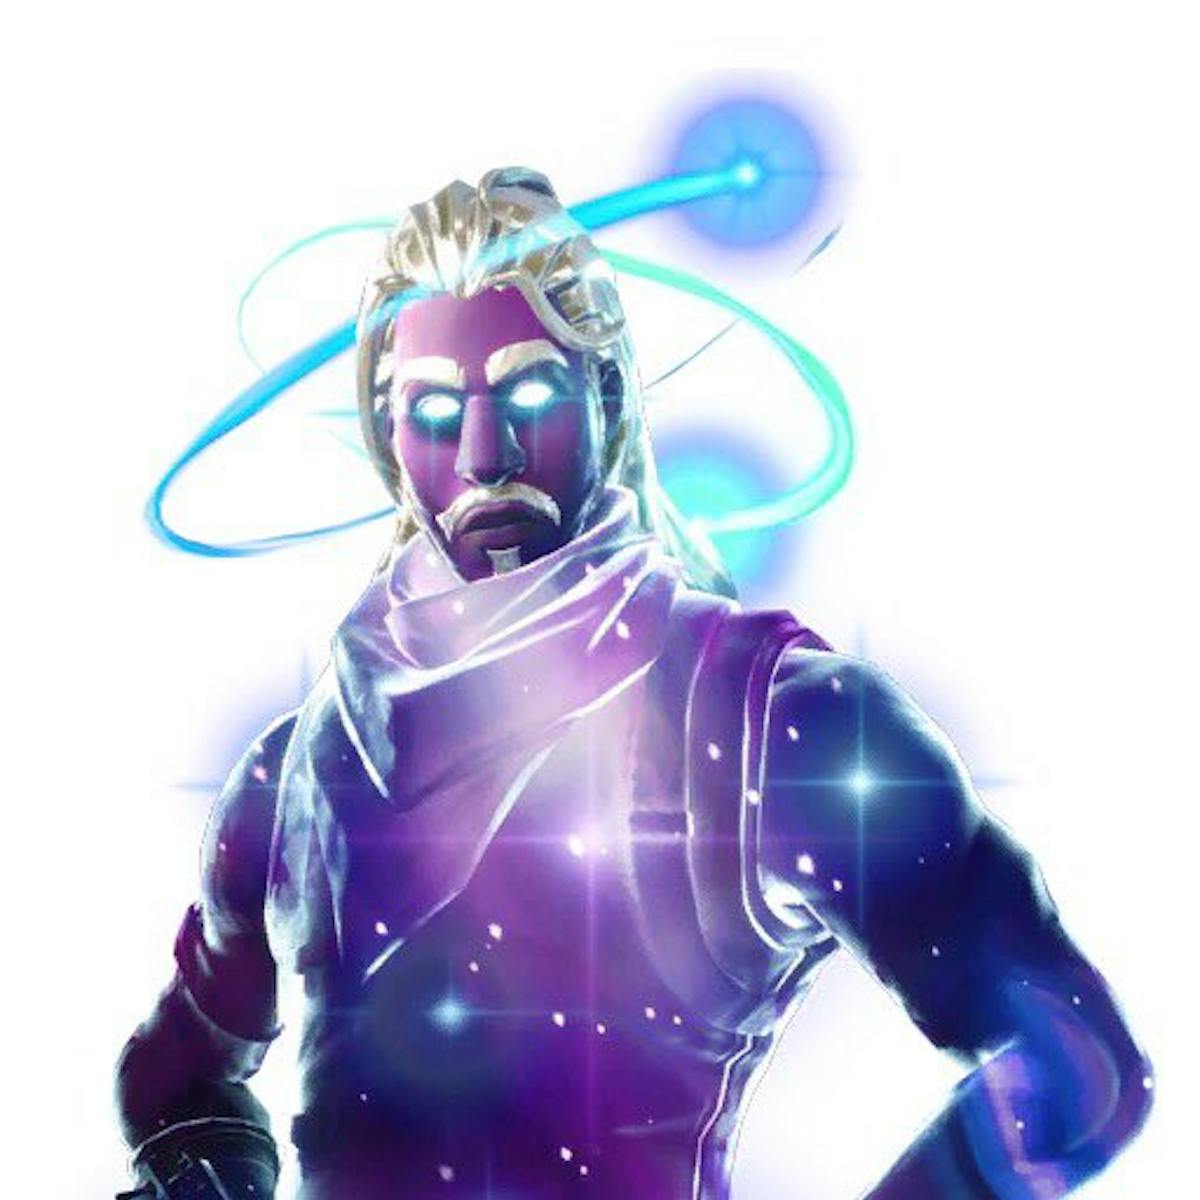 fortnite leaked skins cosmetics galaxy skin may be a samsung exclusive inverse - skin fortnite samsung galaxy s8